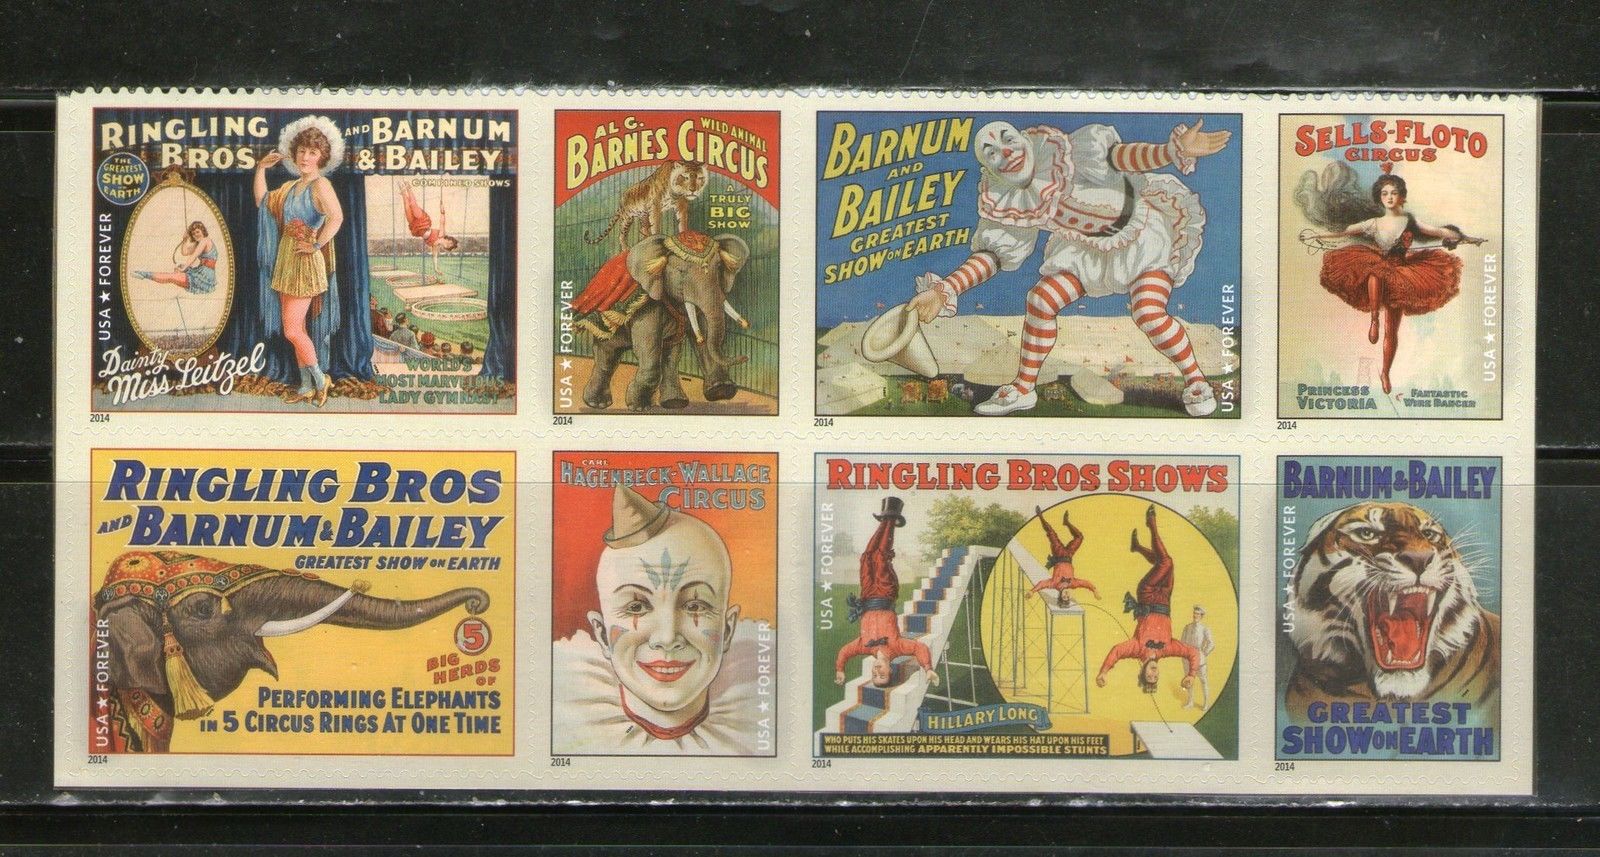 4898-4905i Forever Vintage Circus Posters Imperf Block of 8 #4898-4895ibk